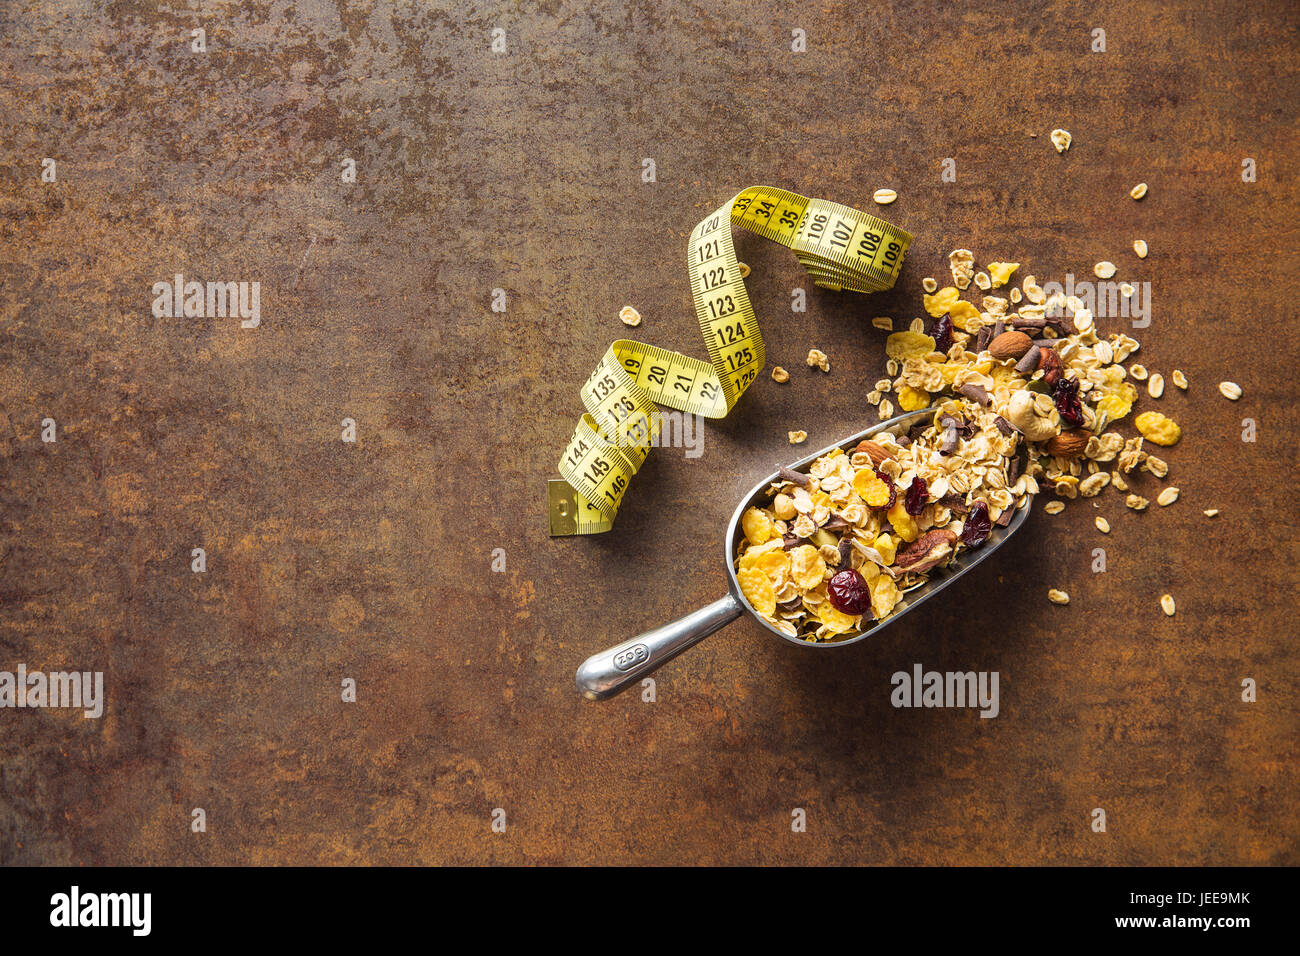 Tasty homemade muesli with nuts and measuring tape. Diet concept. Top view. Stock Photo